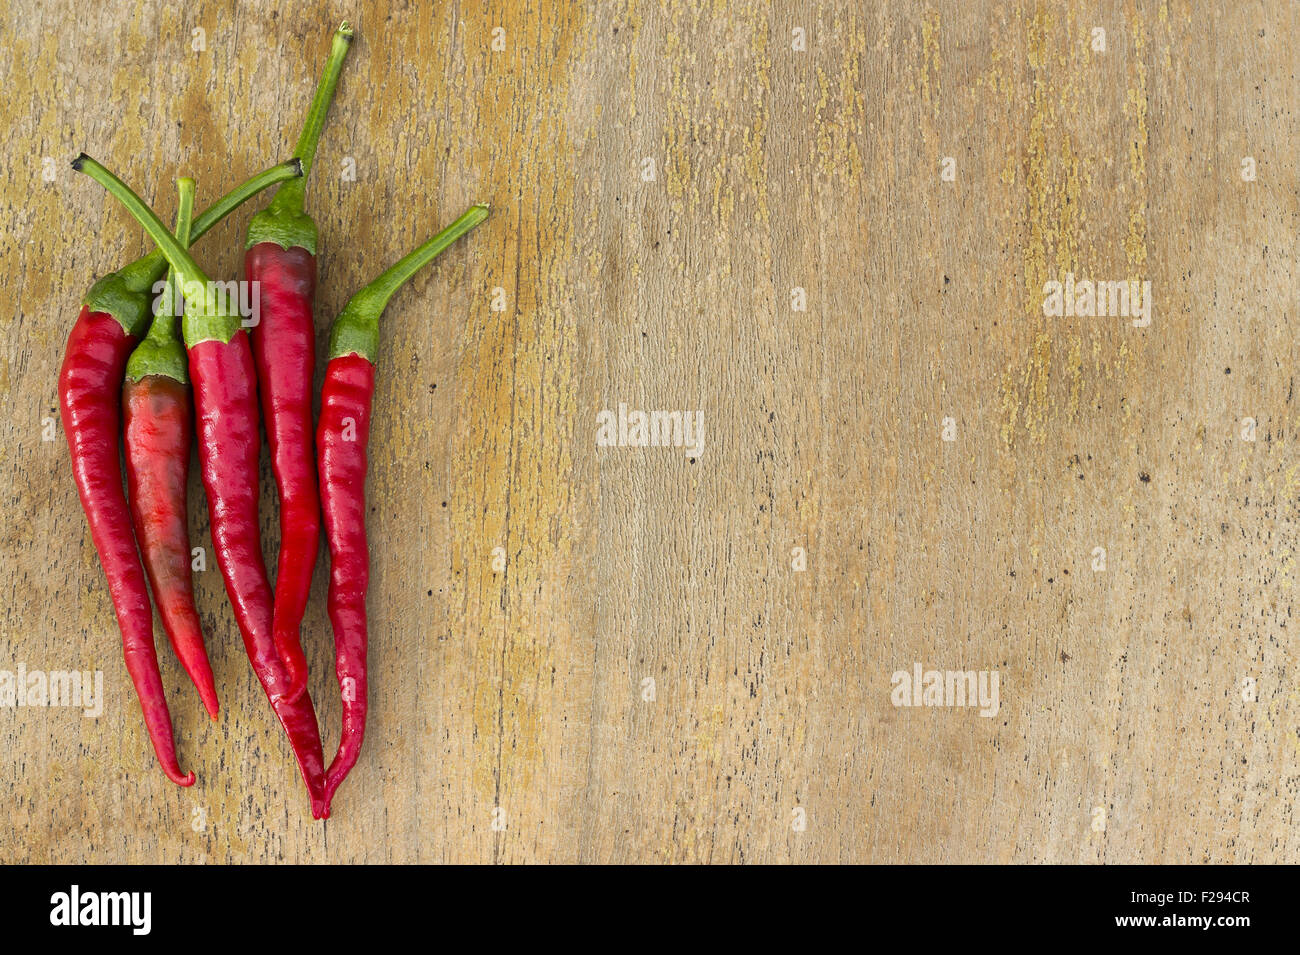 Hot chilly peppers Stockfoto